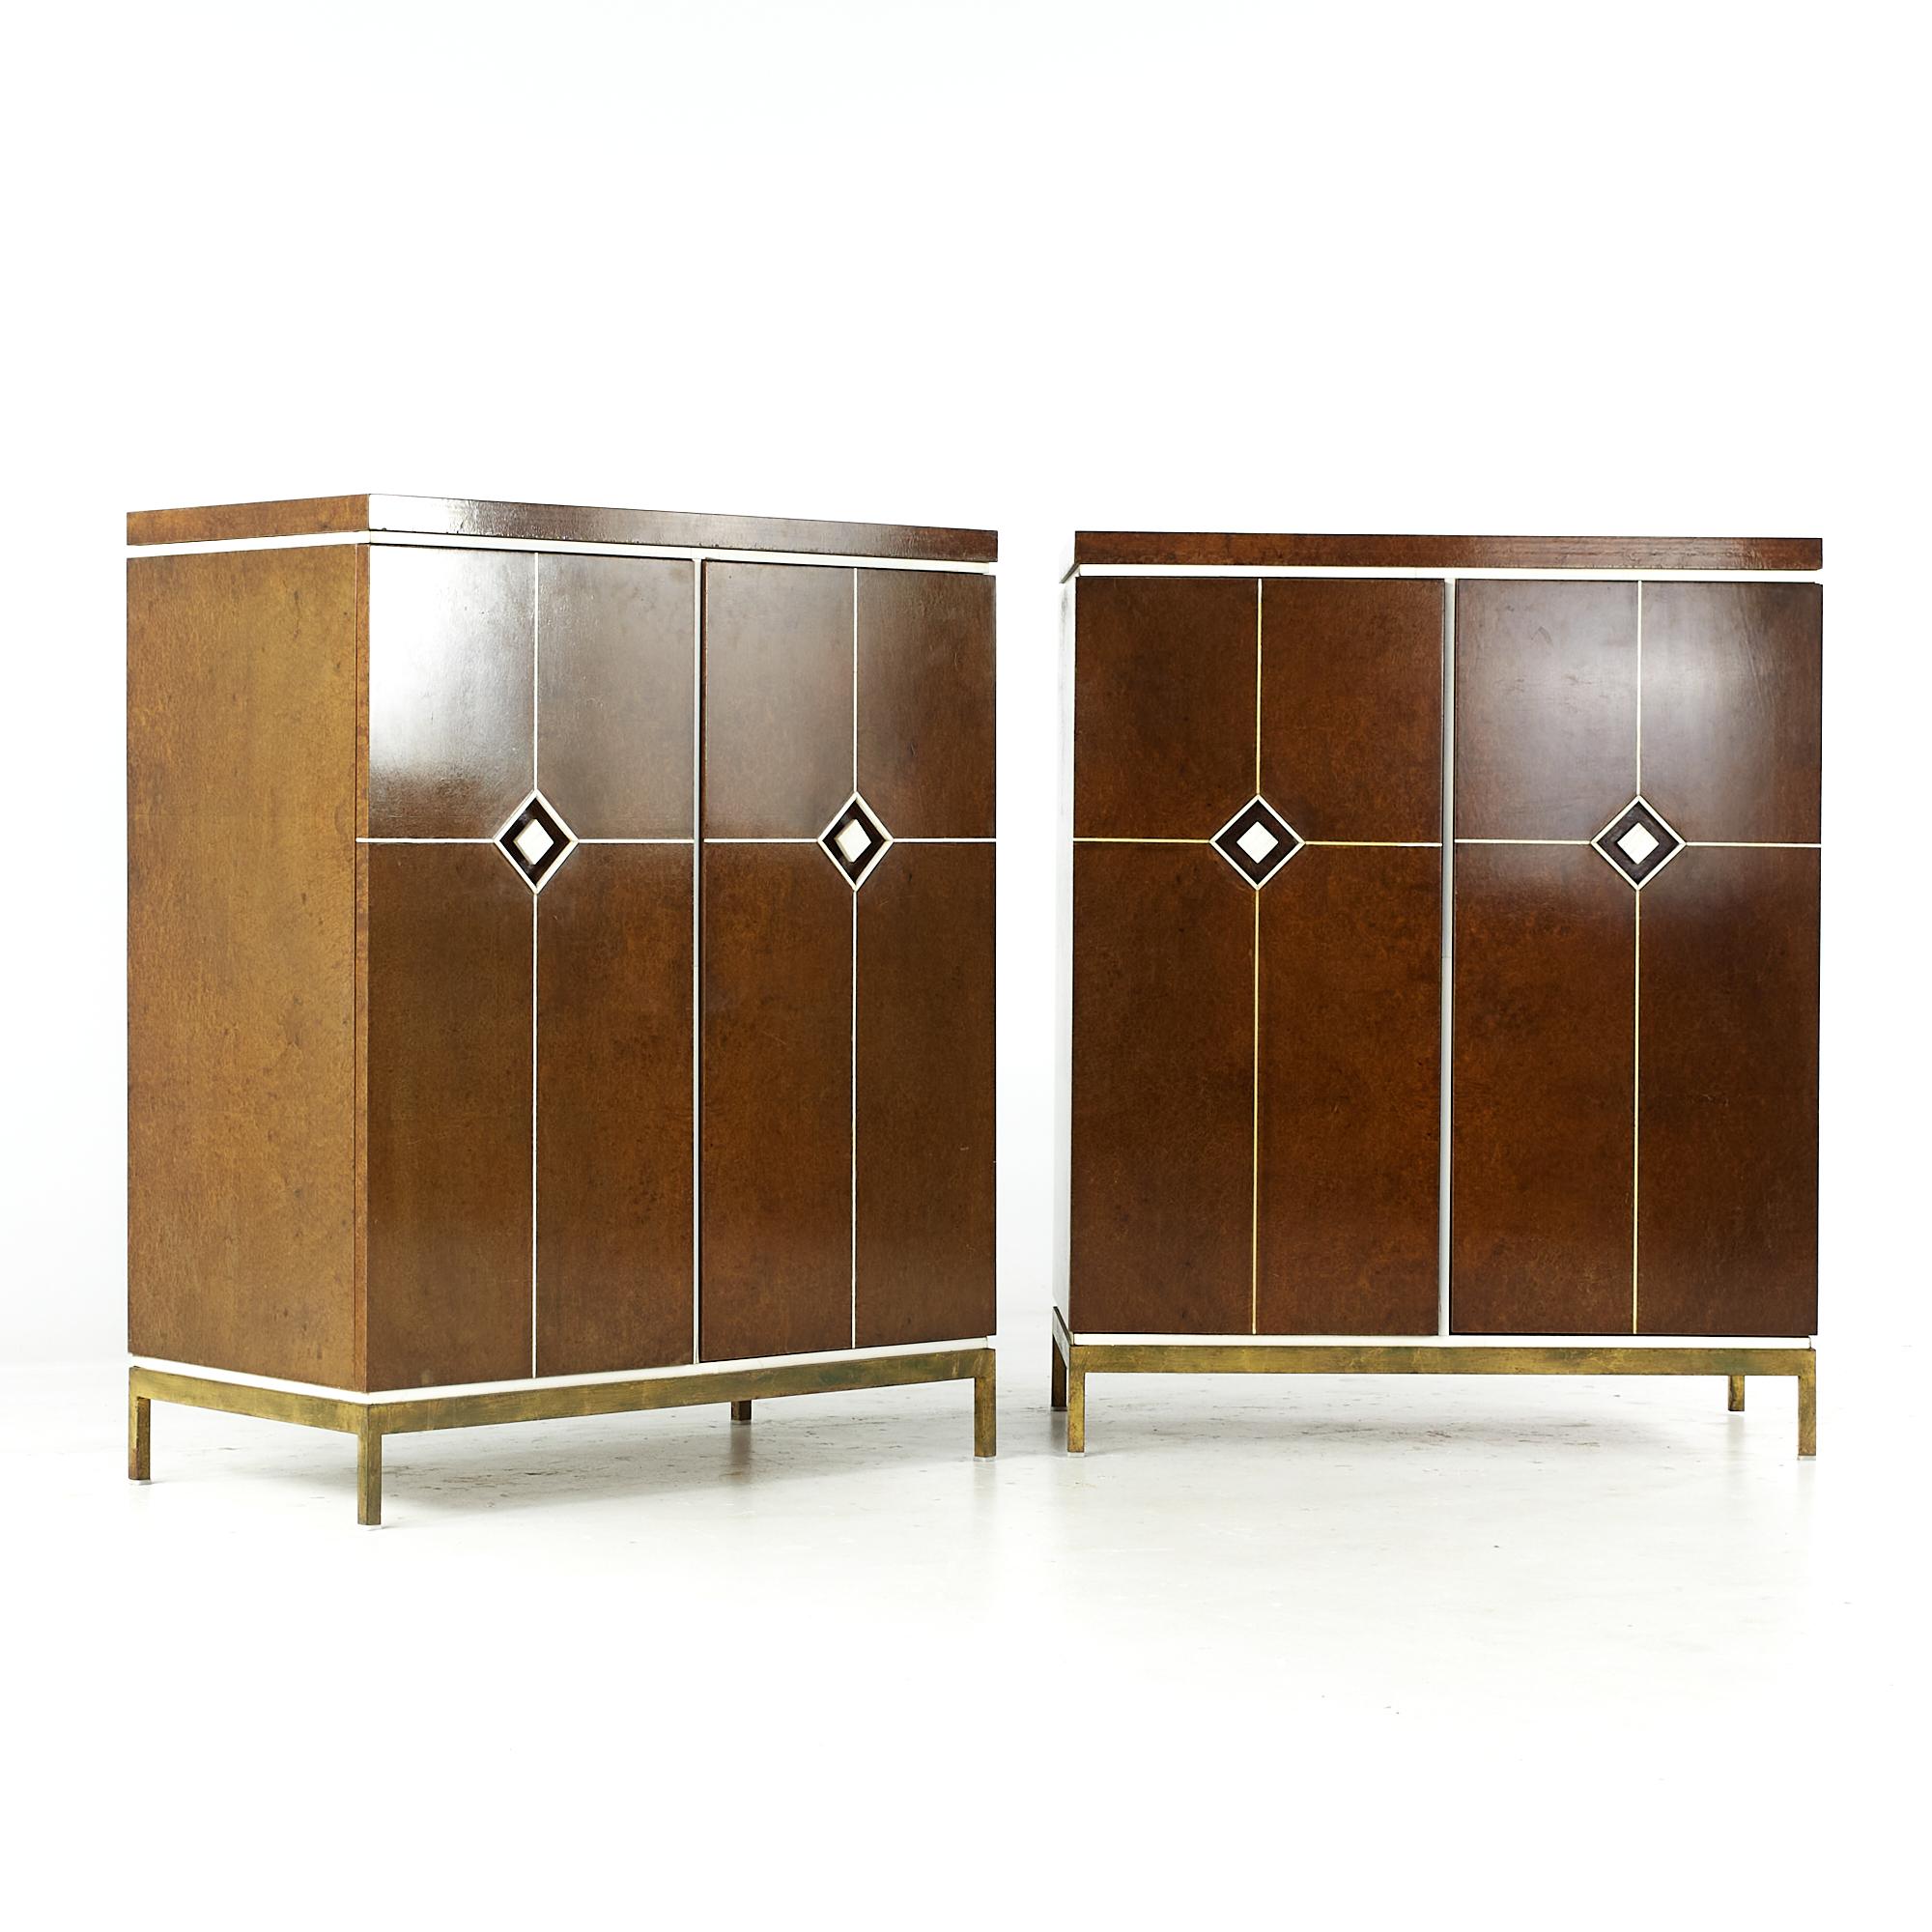 Tommi Parzinger for Charak midcentury Bar Cabinet - Pair

Each bar cabinet measures: 34.25 wide x 18.25 deep x 42.25 inches high

All pieces of furniture can be had in what we call restored vintage condition. That means the piece is restored